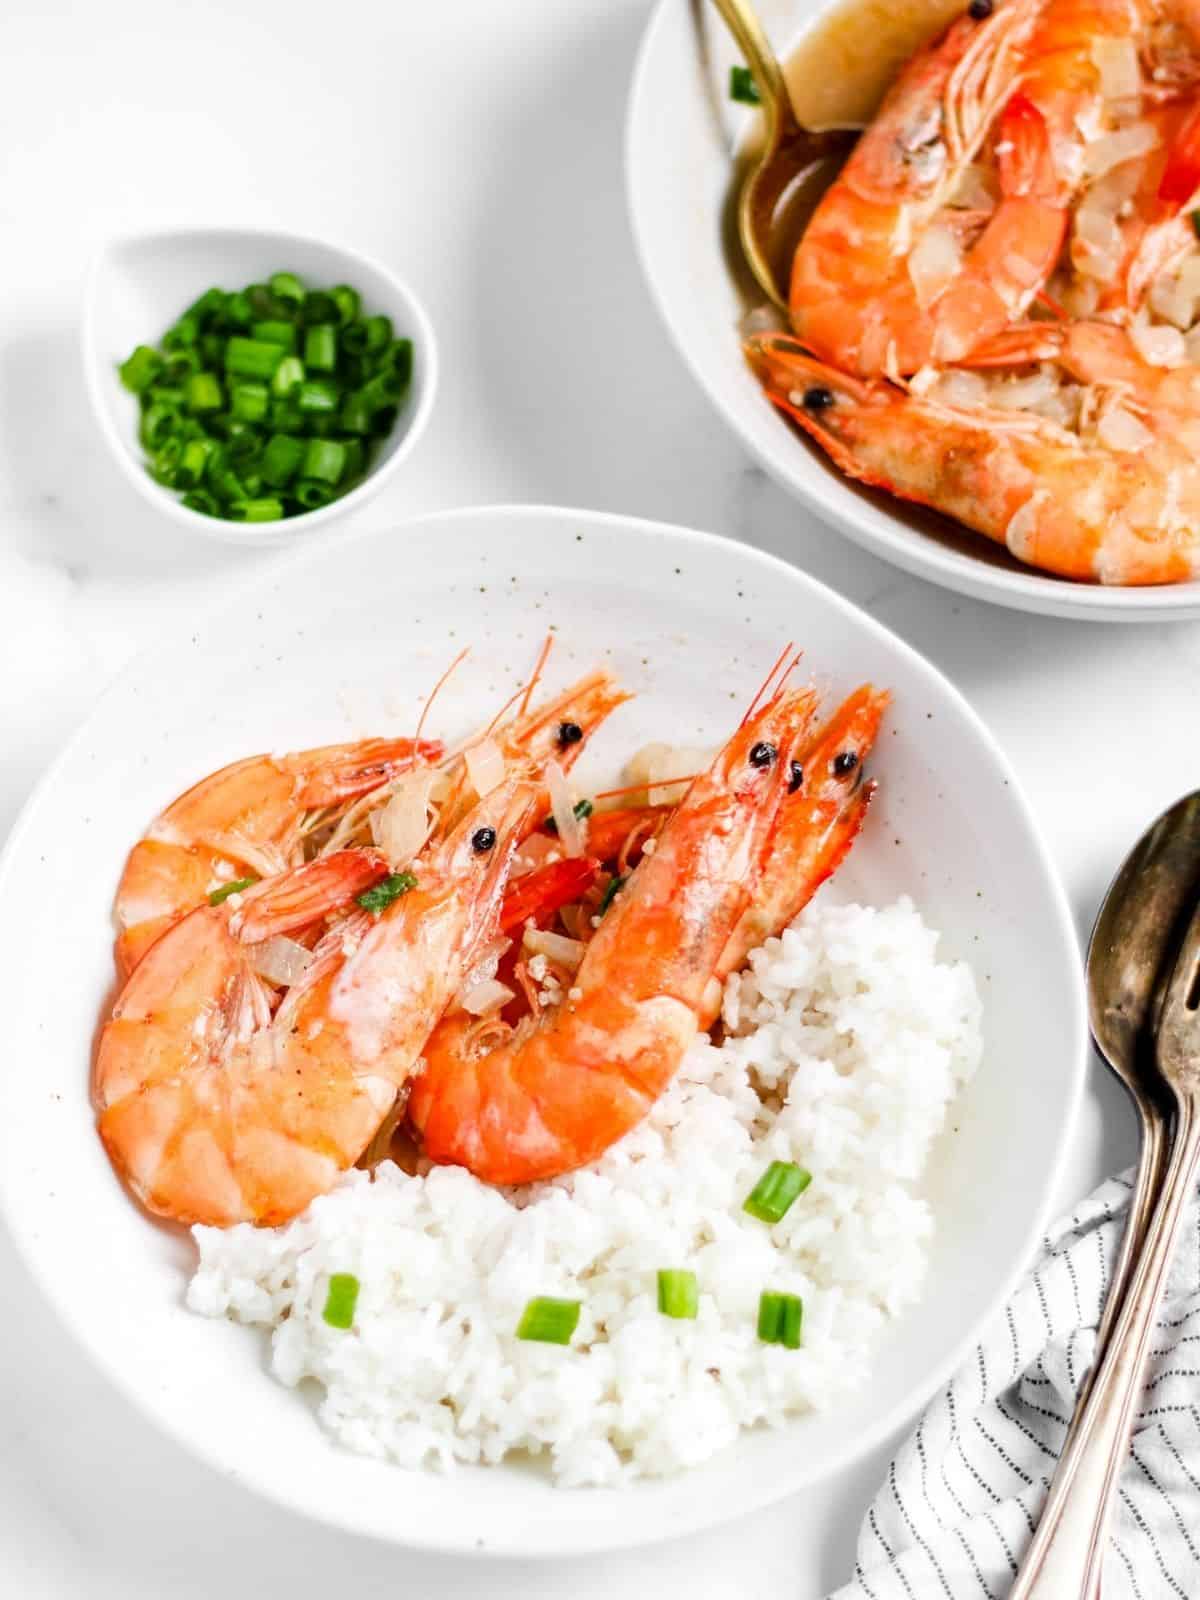 Finish dish of butter garlic shrimp with sprite in a table with rice.